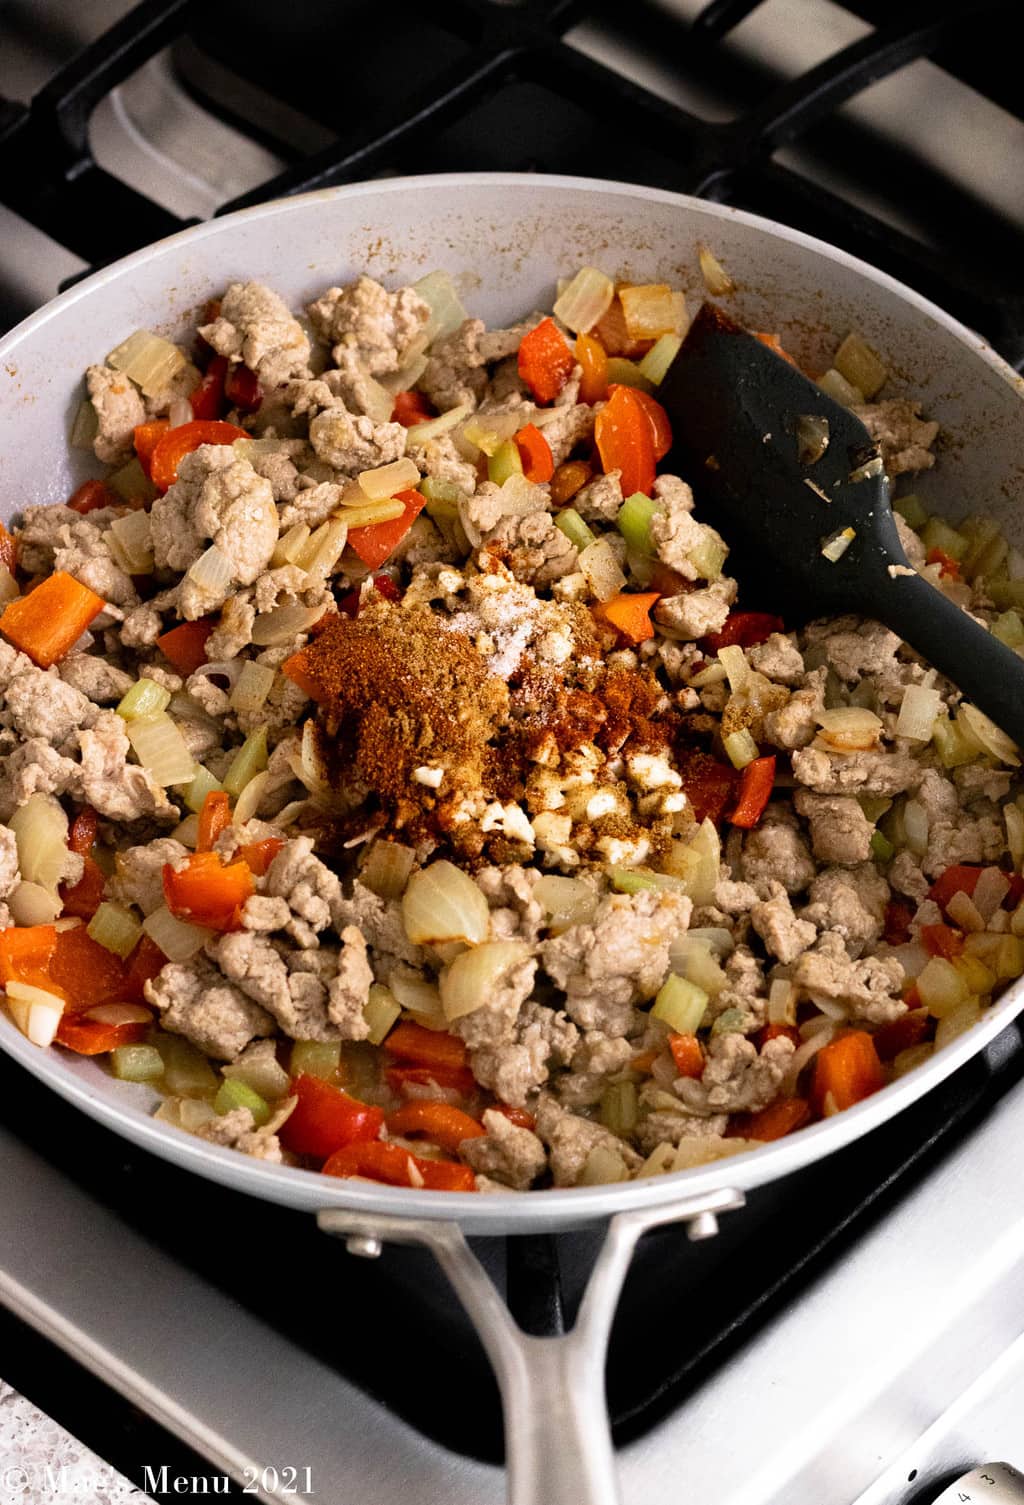 An overhead shot of a saute skillet with onions, peppers, and turkey with a ground spice mixture.